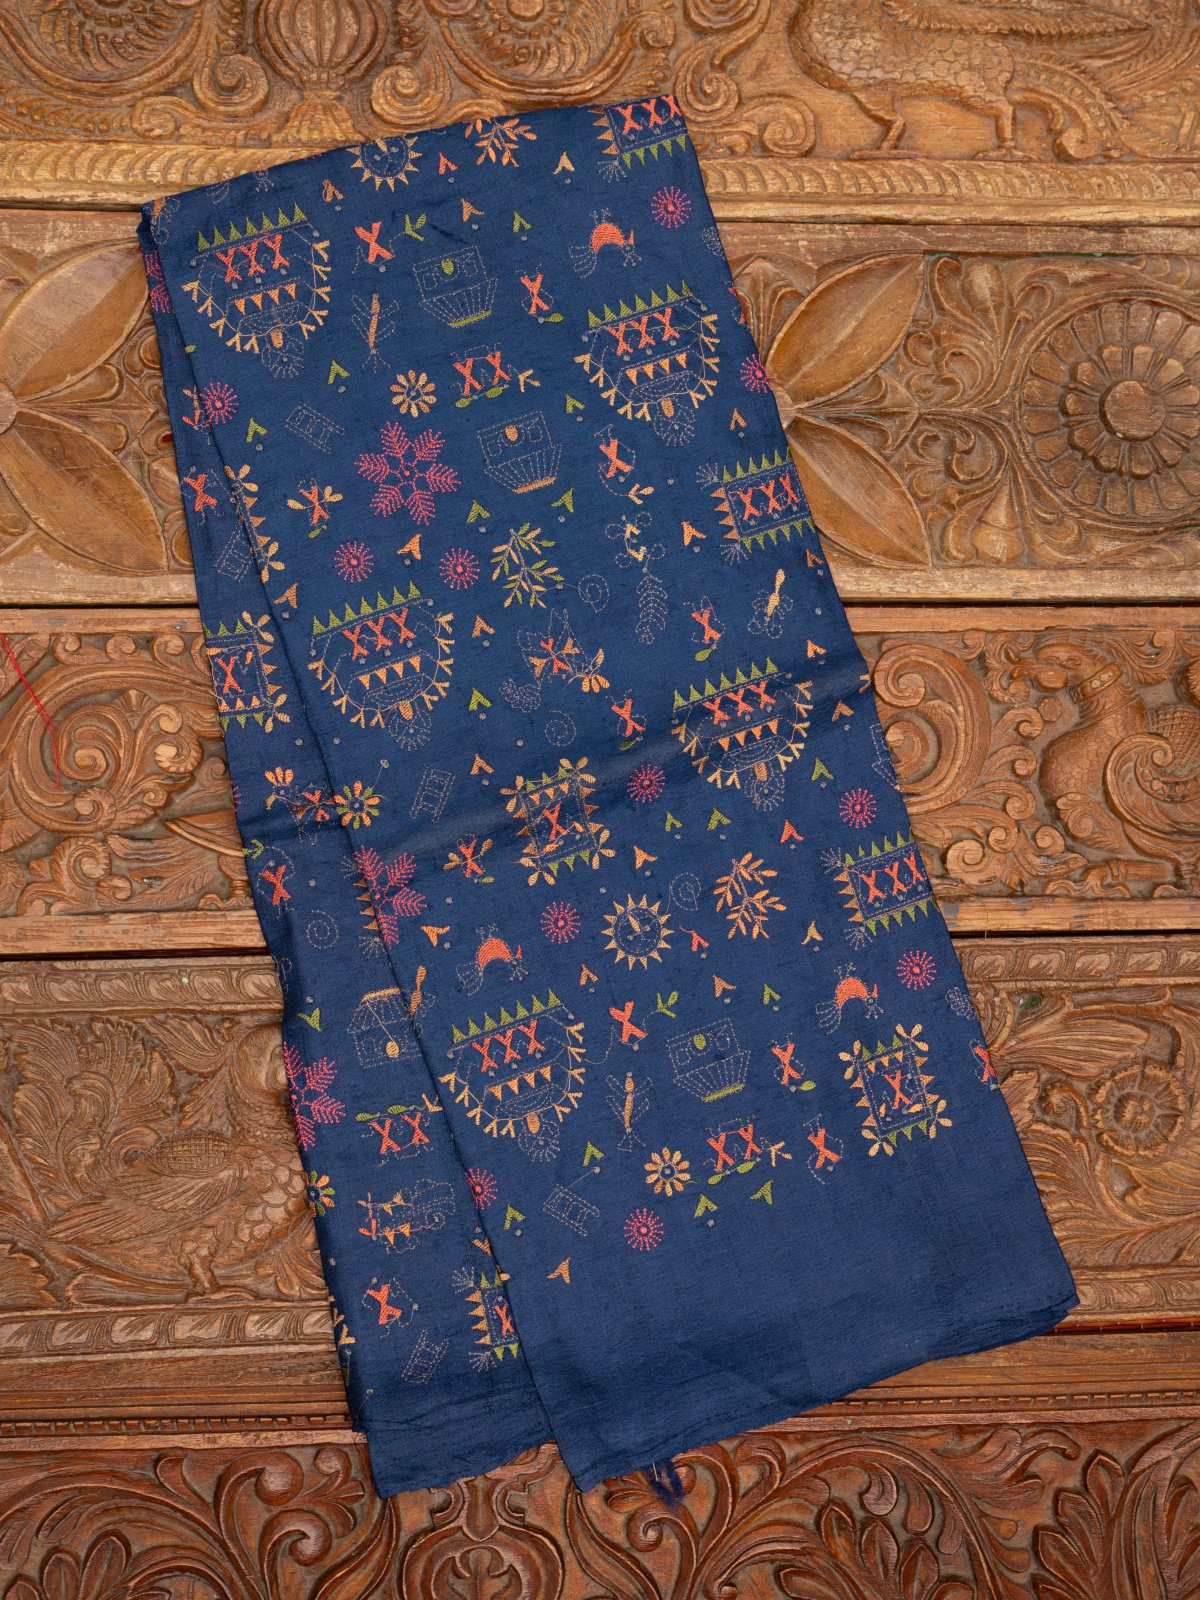 Blue Tussar Silk Embroidered Blouse                      